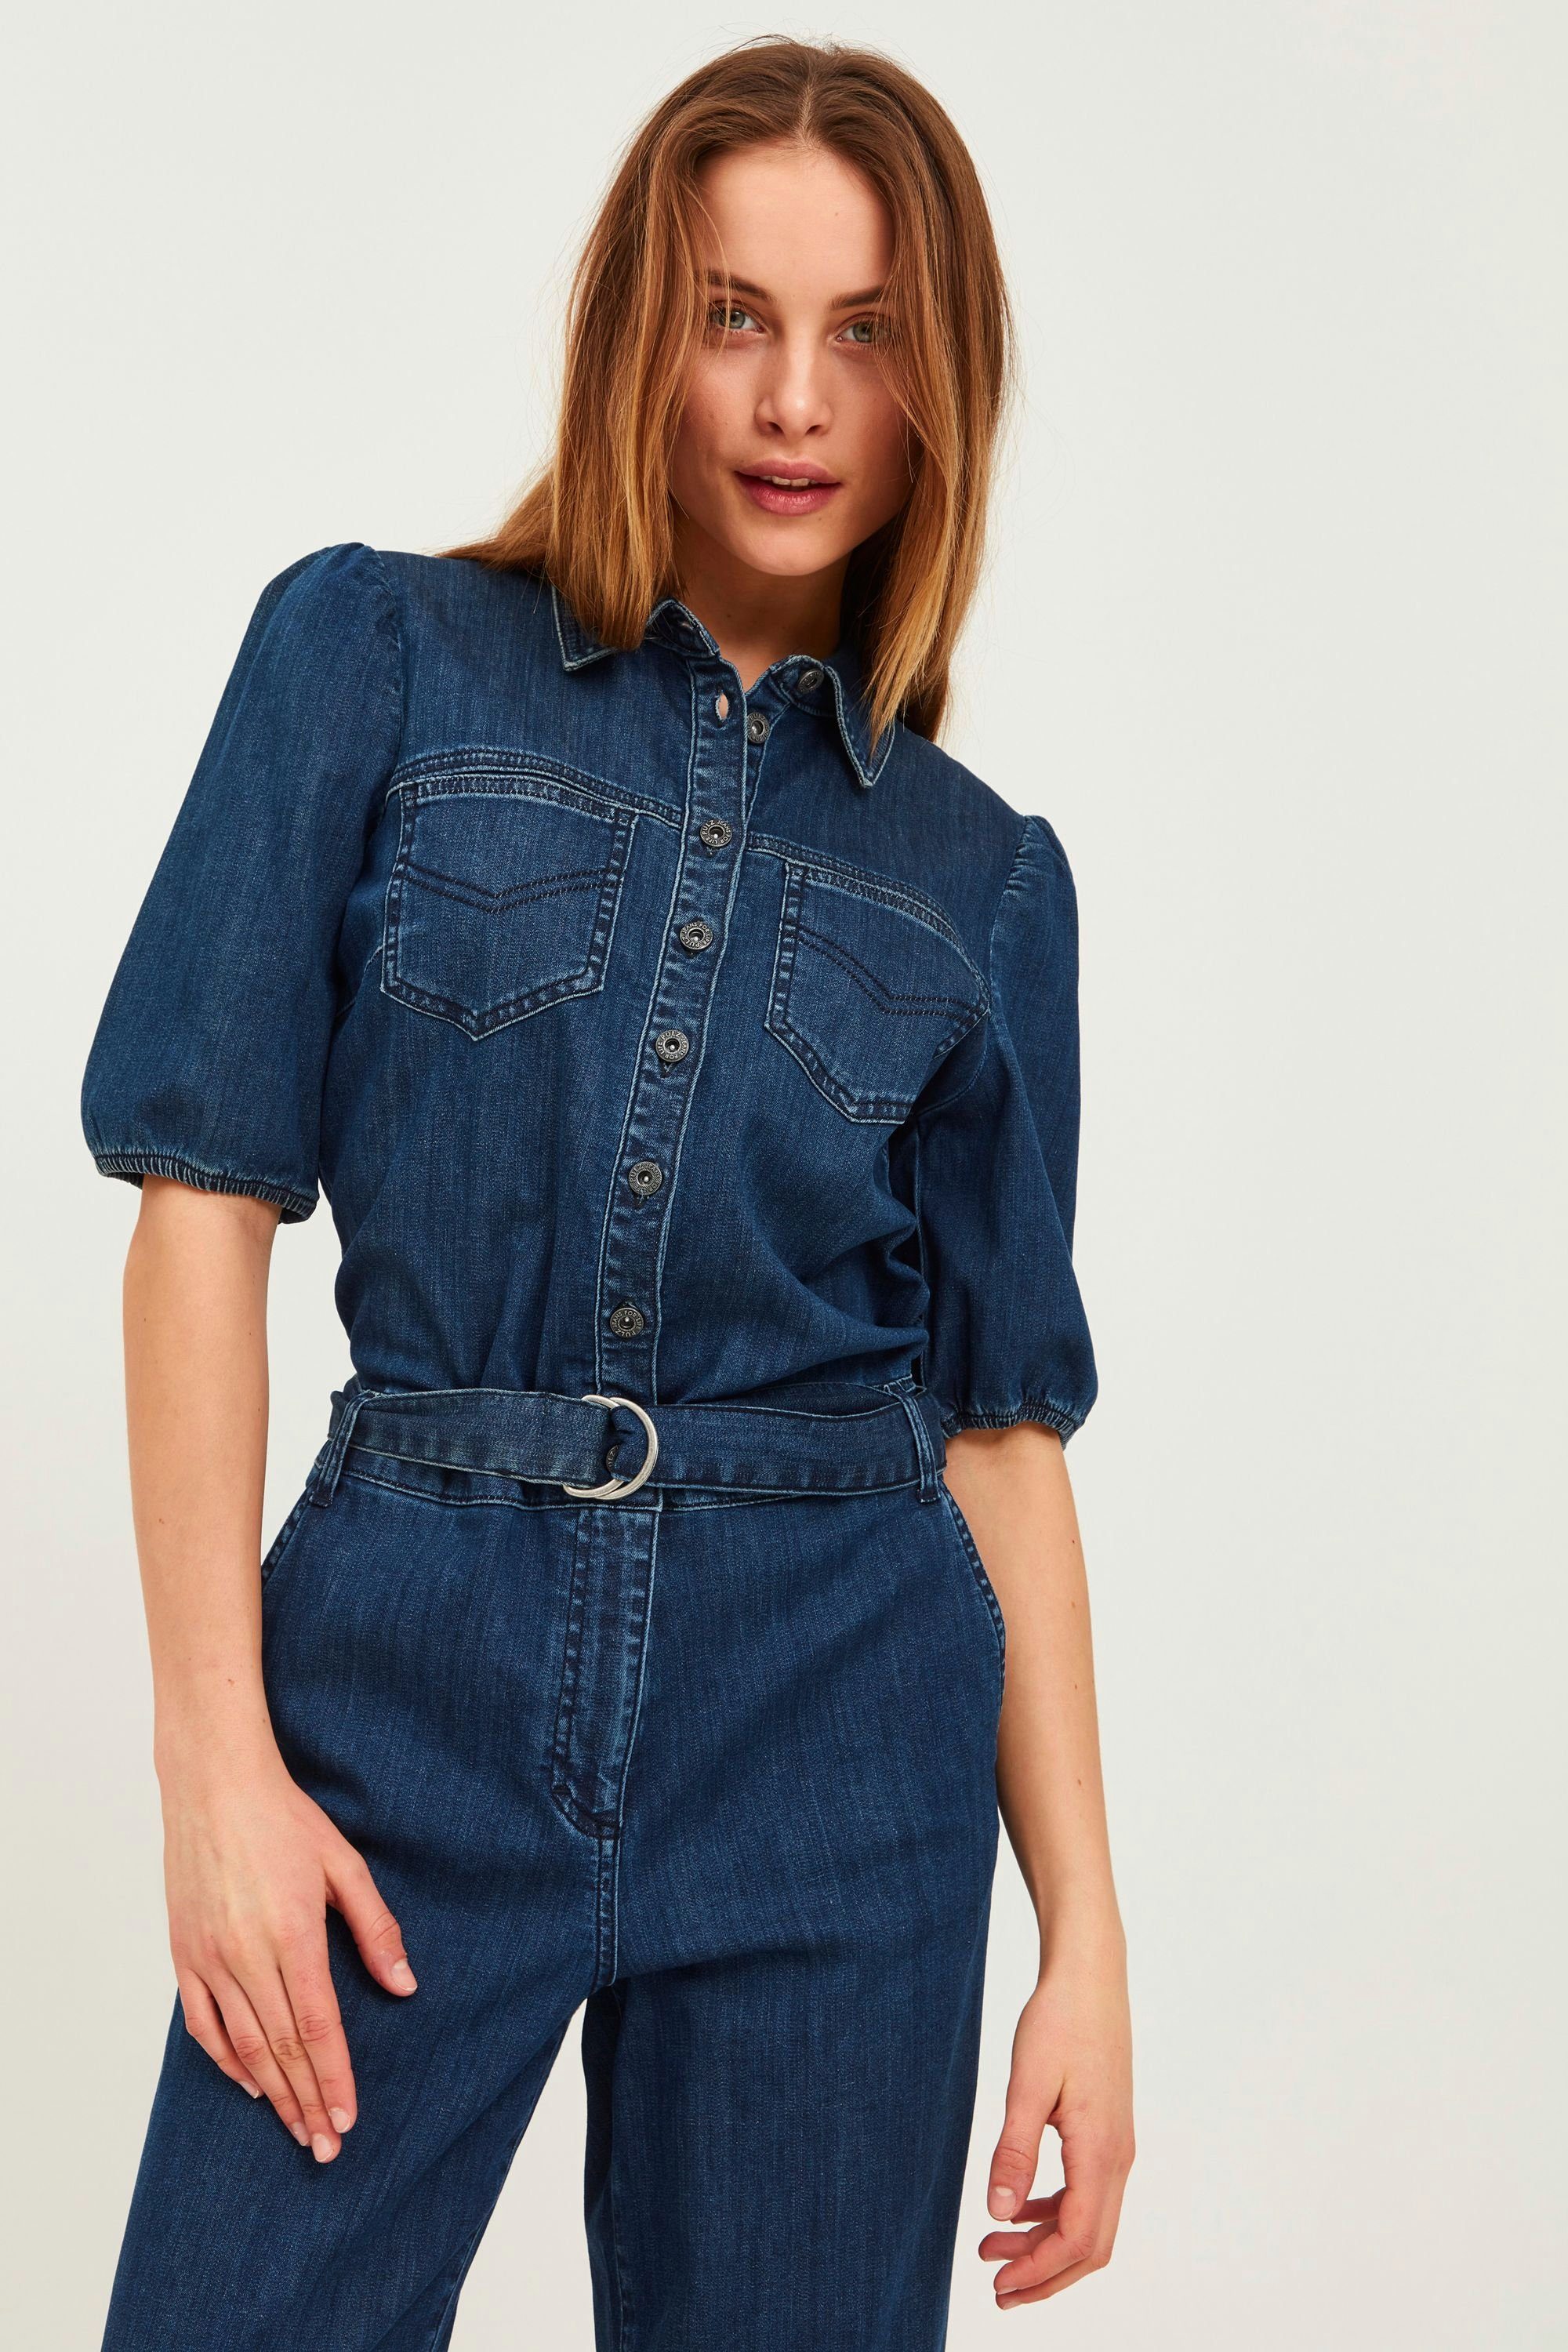 Pulz Jeans Overall »PZCASSI - 50206200« kaufen | OTTO